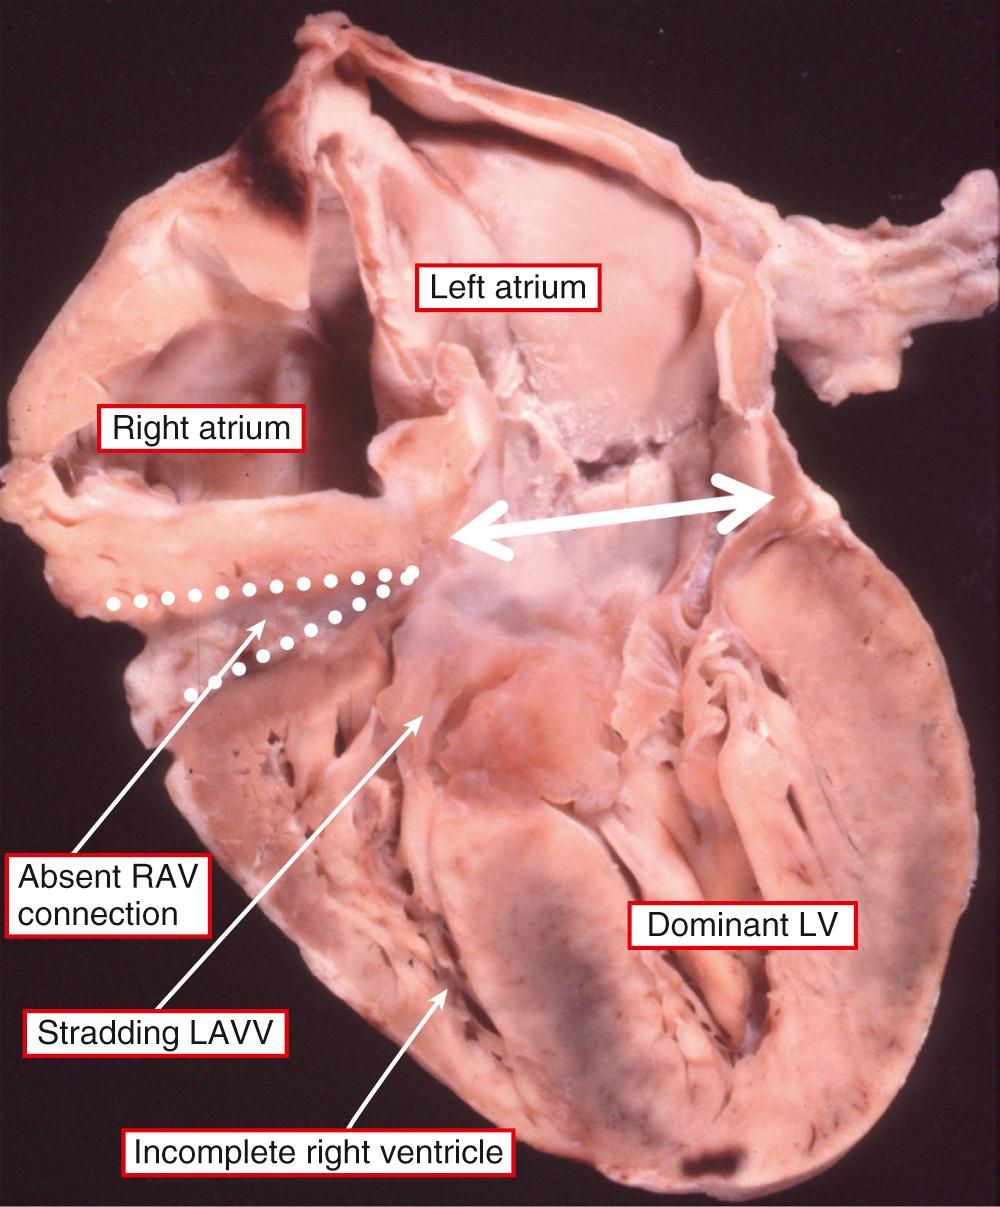 Fig. 69.5, Rare combination of absence of the right atrioventricular (RAV) connection (dotted lines) but with straddling and overriding of the left atrioventricular valve (LAVV). This produces an atrioventricular connection that is uniatrial but biventricular. The left ventricle (LV) is the dominant ventricle, but both ventricles are incomplete.